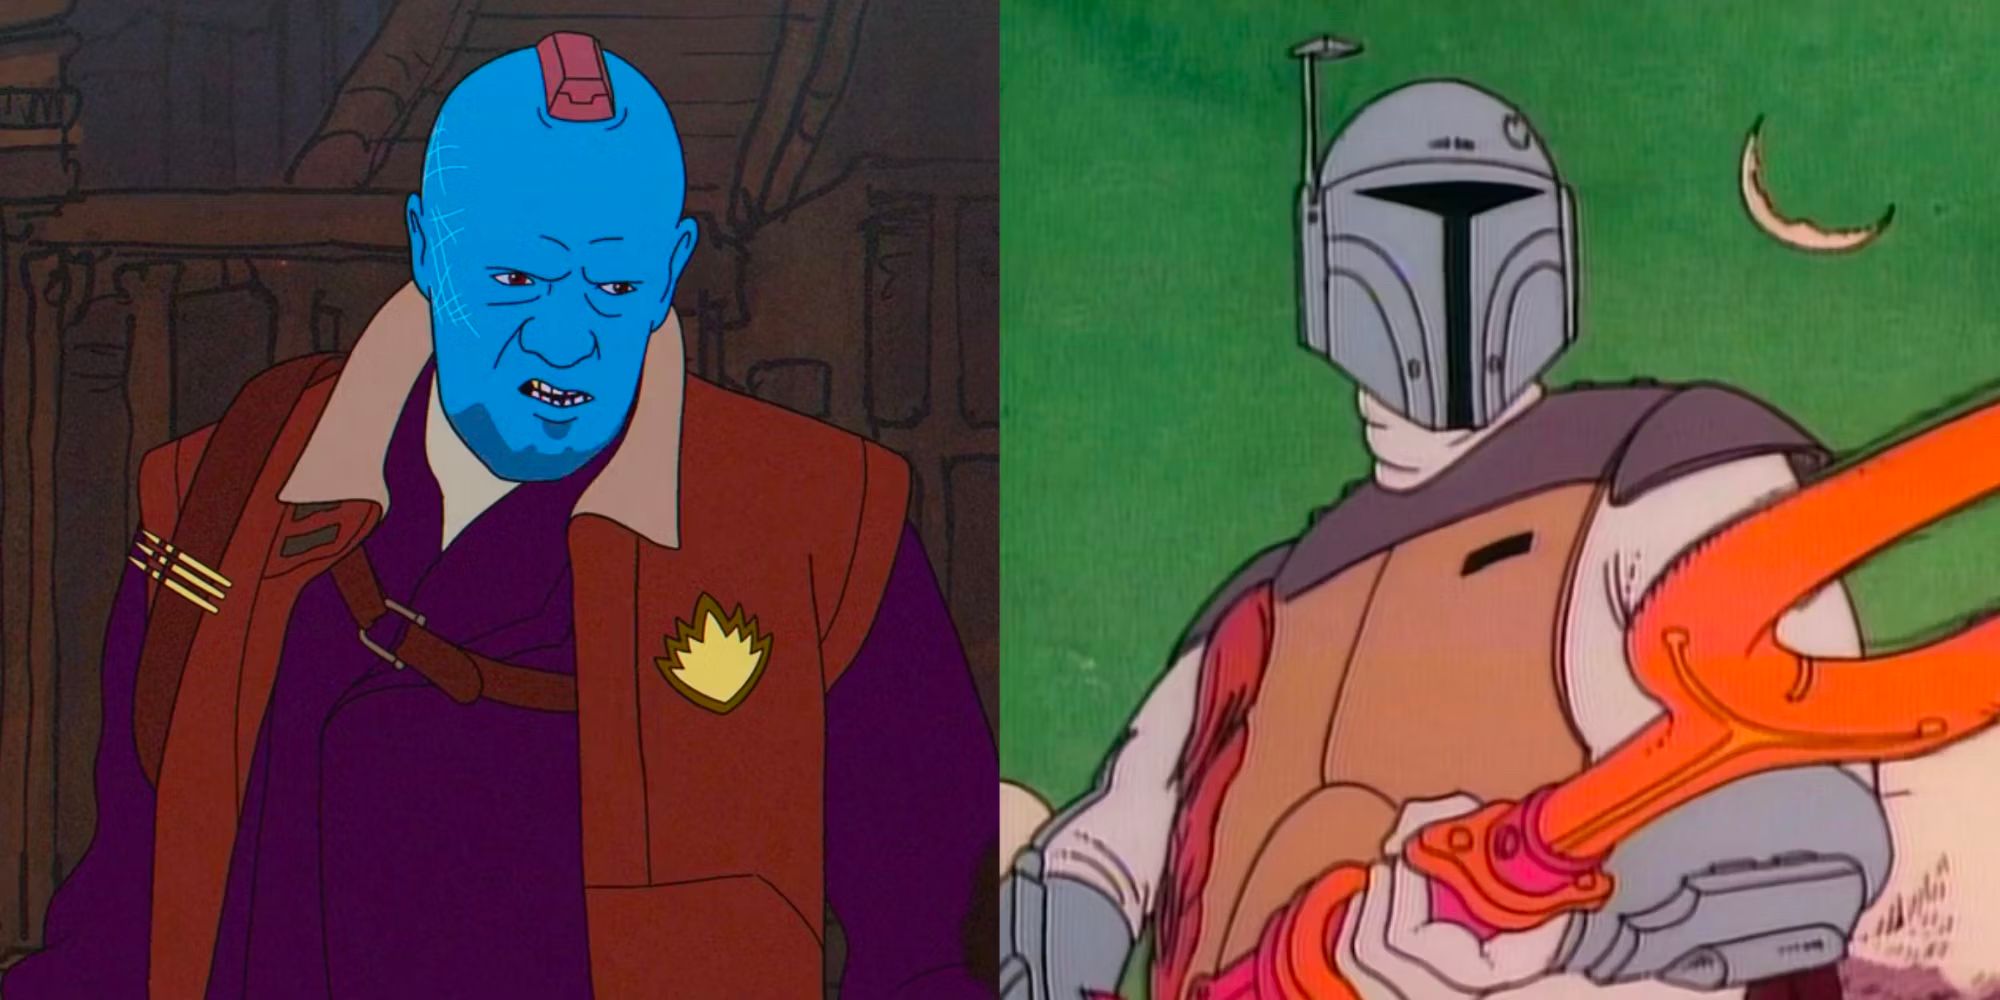 Star Wars and Guardians of the Galaxy Holiday Special Comparison - Yondu and Boba Fett animated sequences side by side